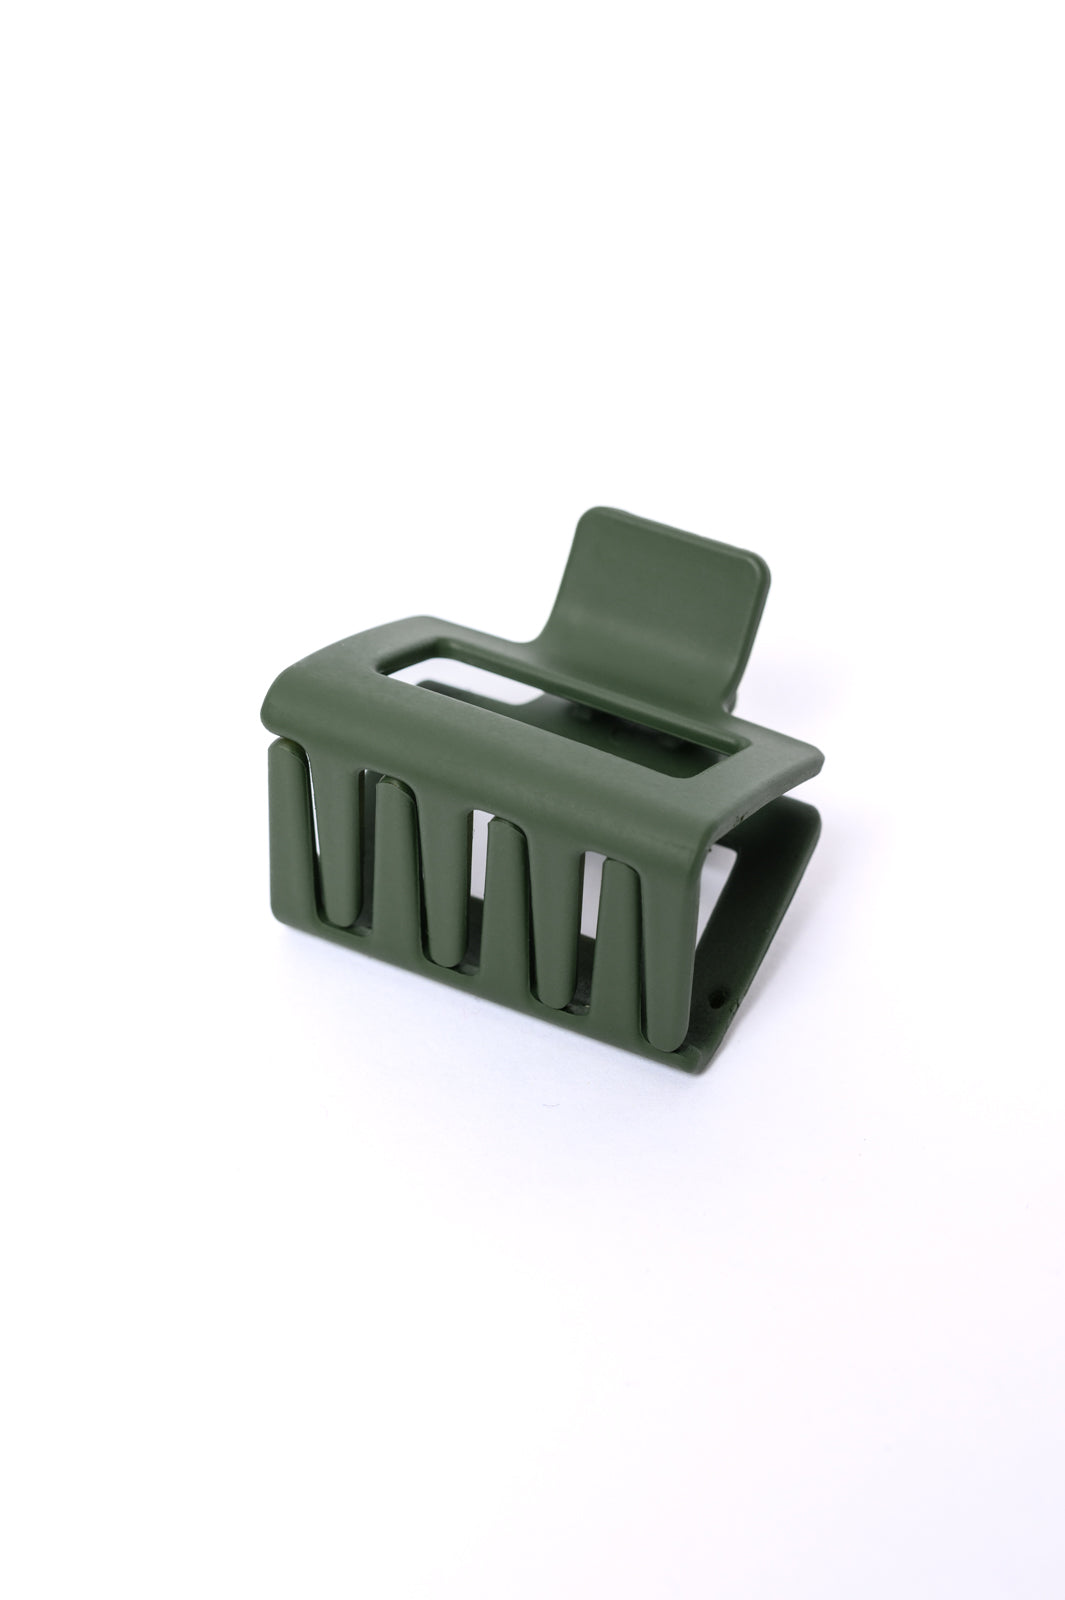 Claw Clip Set of 4 in Forest Green (Ships in 1-2 Weeks) - 2/13